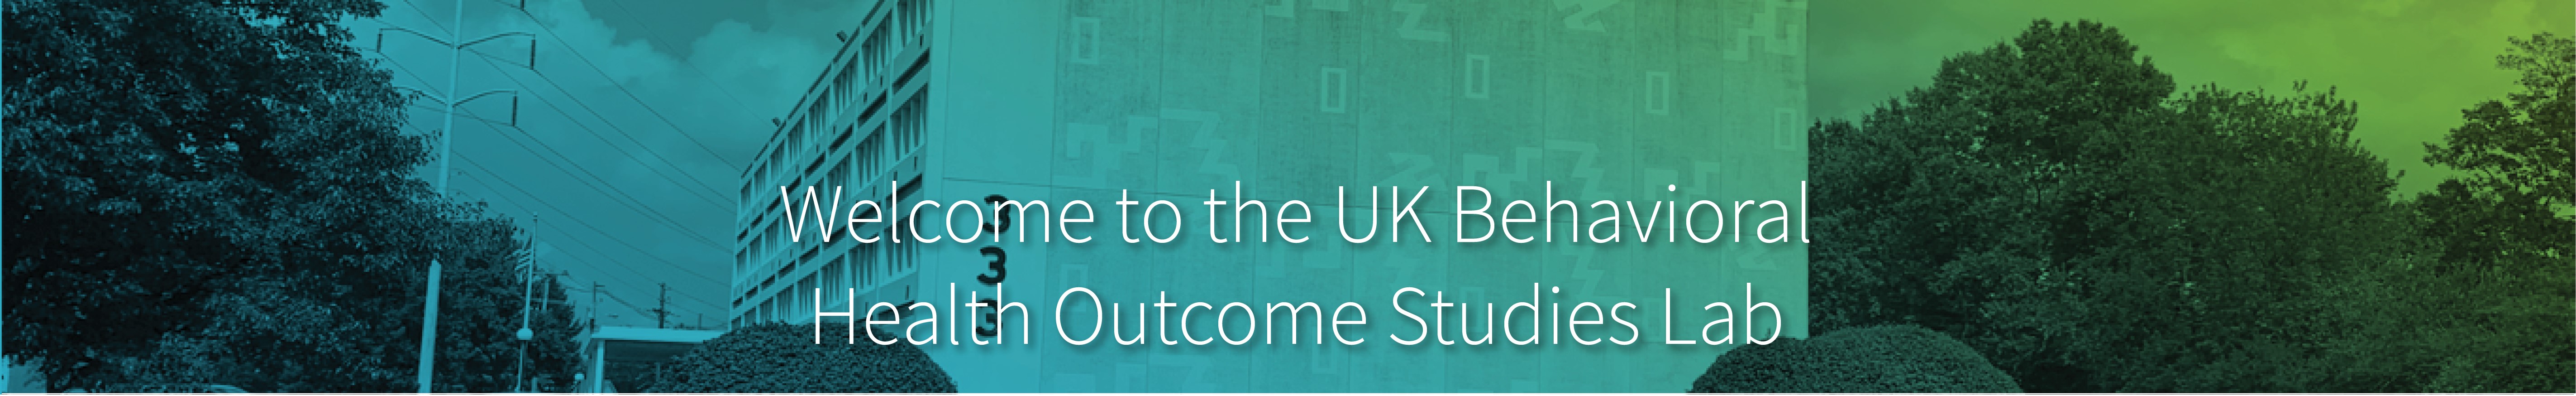 Welcome to the UK Behavioral Health Outcome Studies Lab